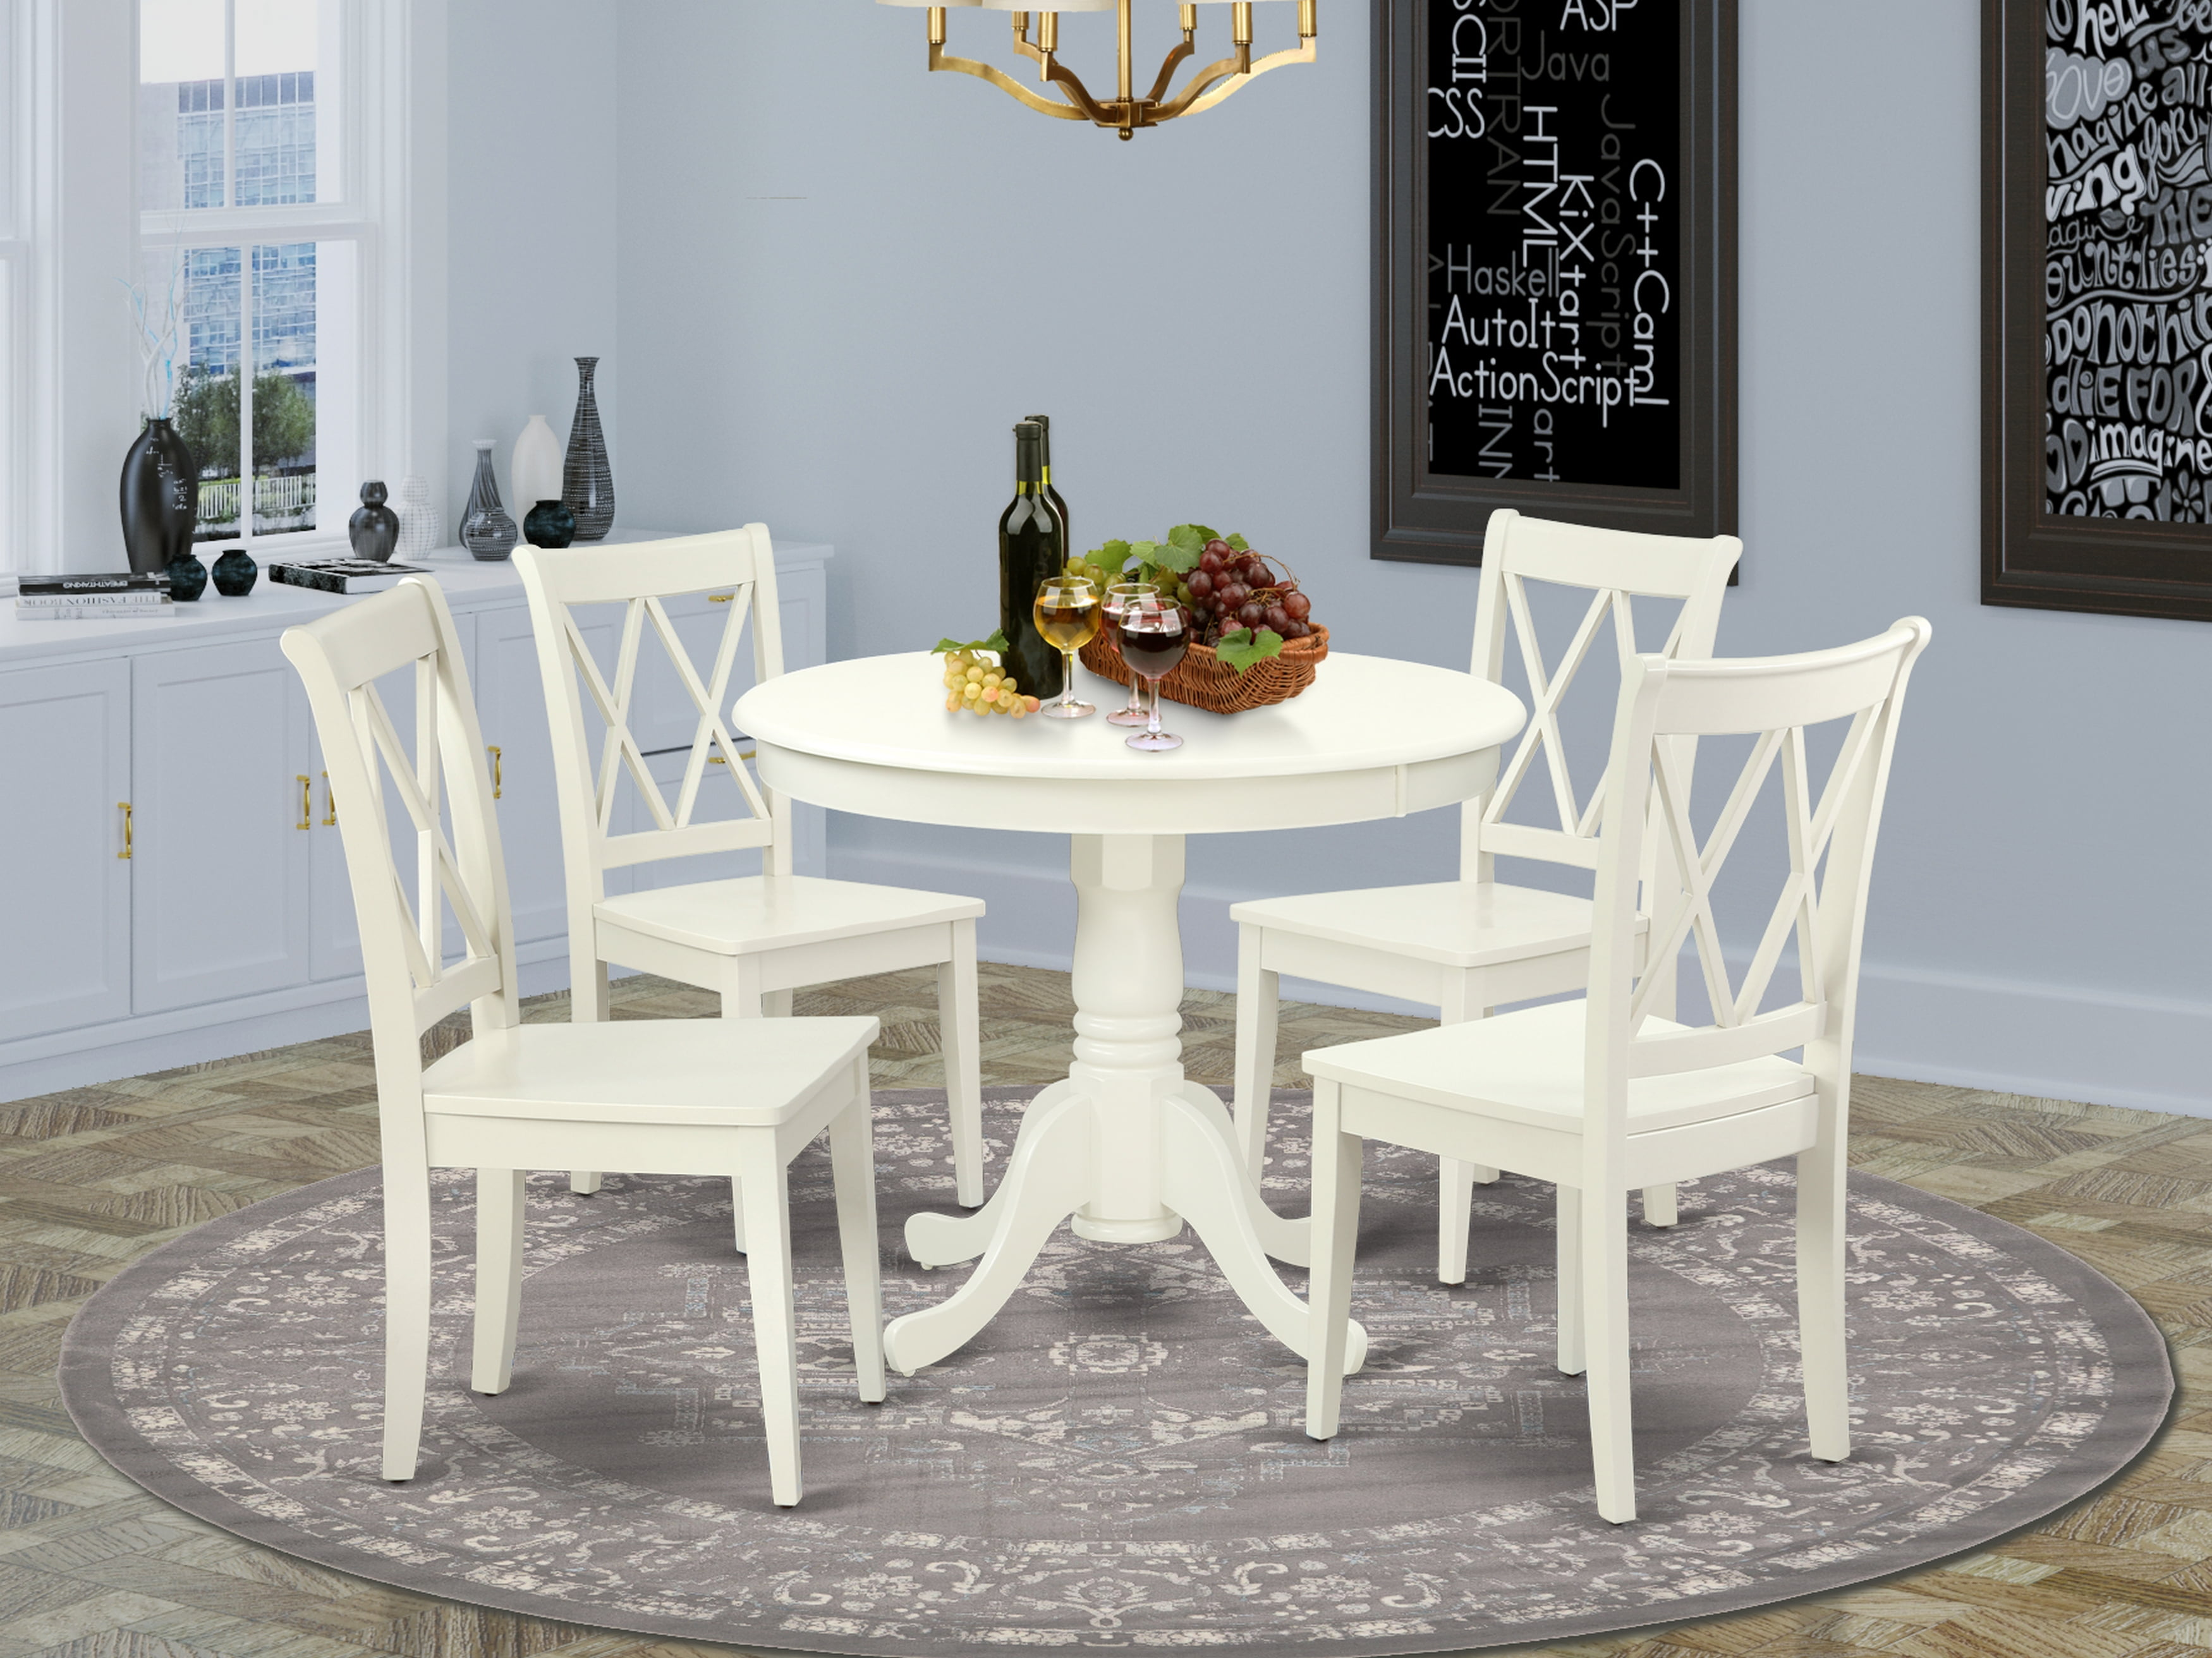 Ancl5 Lwh W 5pc Round 36 Inch Table And, 36 Inch Round Kitchen Table And 4 Chairs